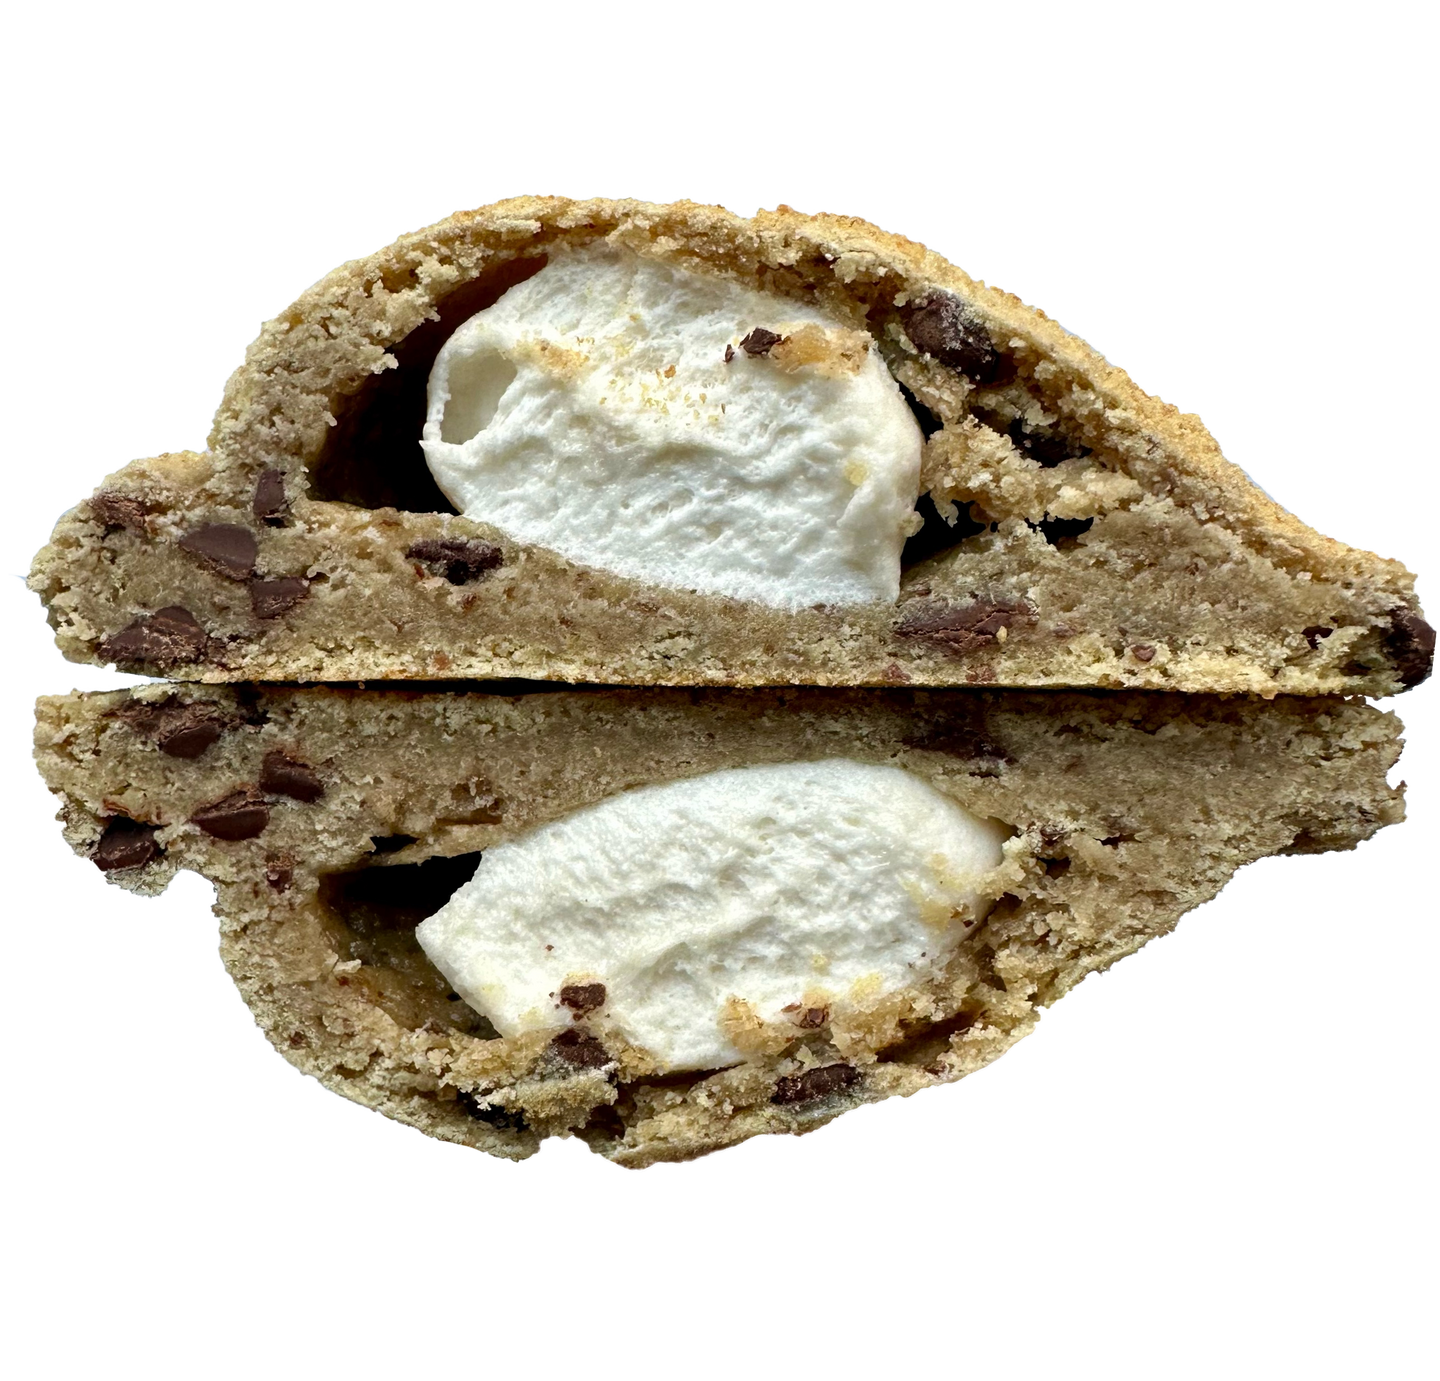 Marshmallow-Stuffed S'mores Cookie in Des Moines, Iowa